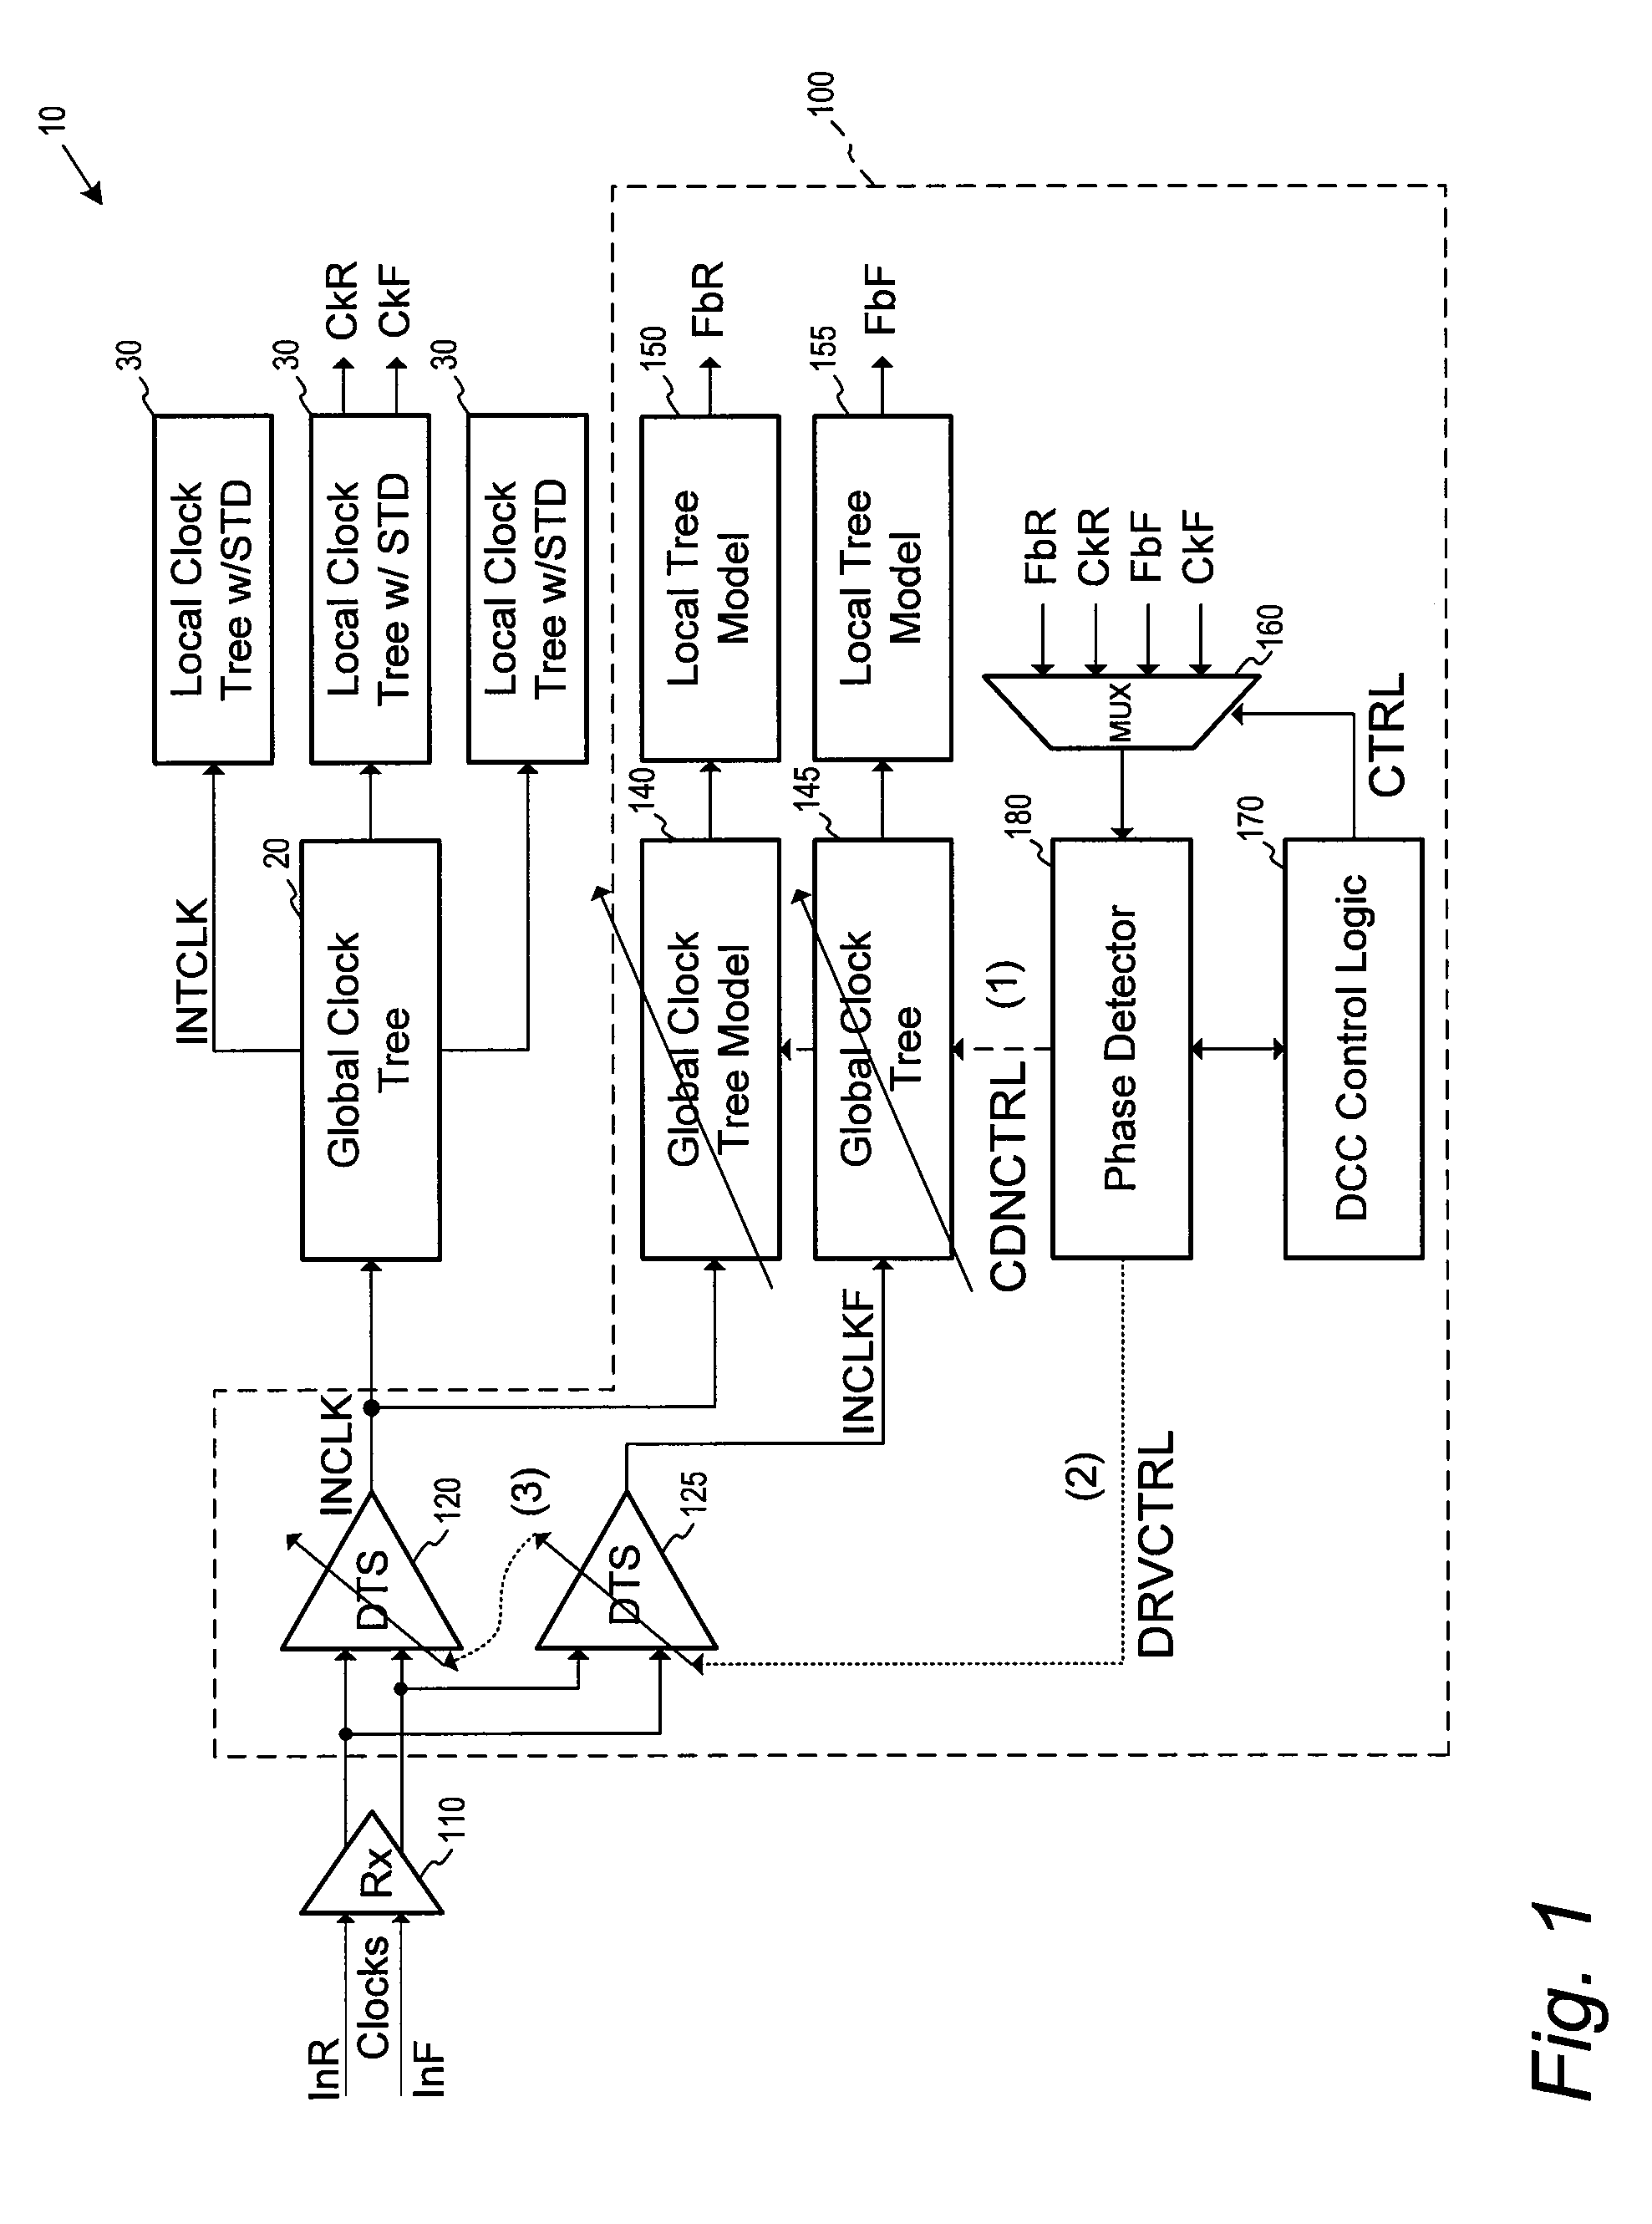 Circuits and methods for clock signal duty-cycle correction